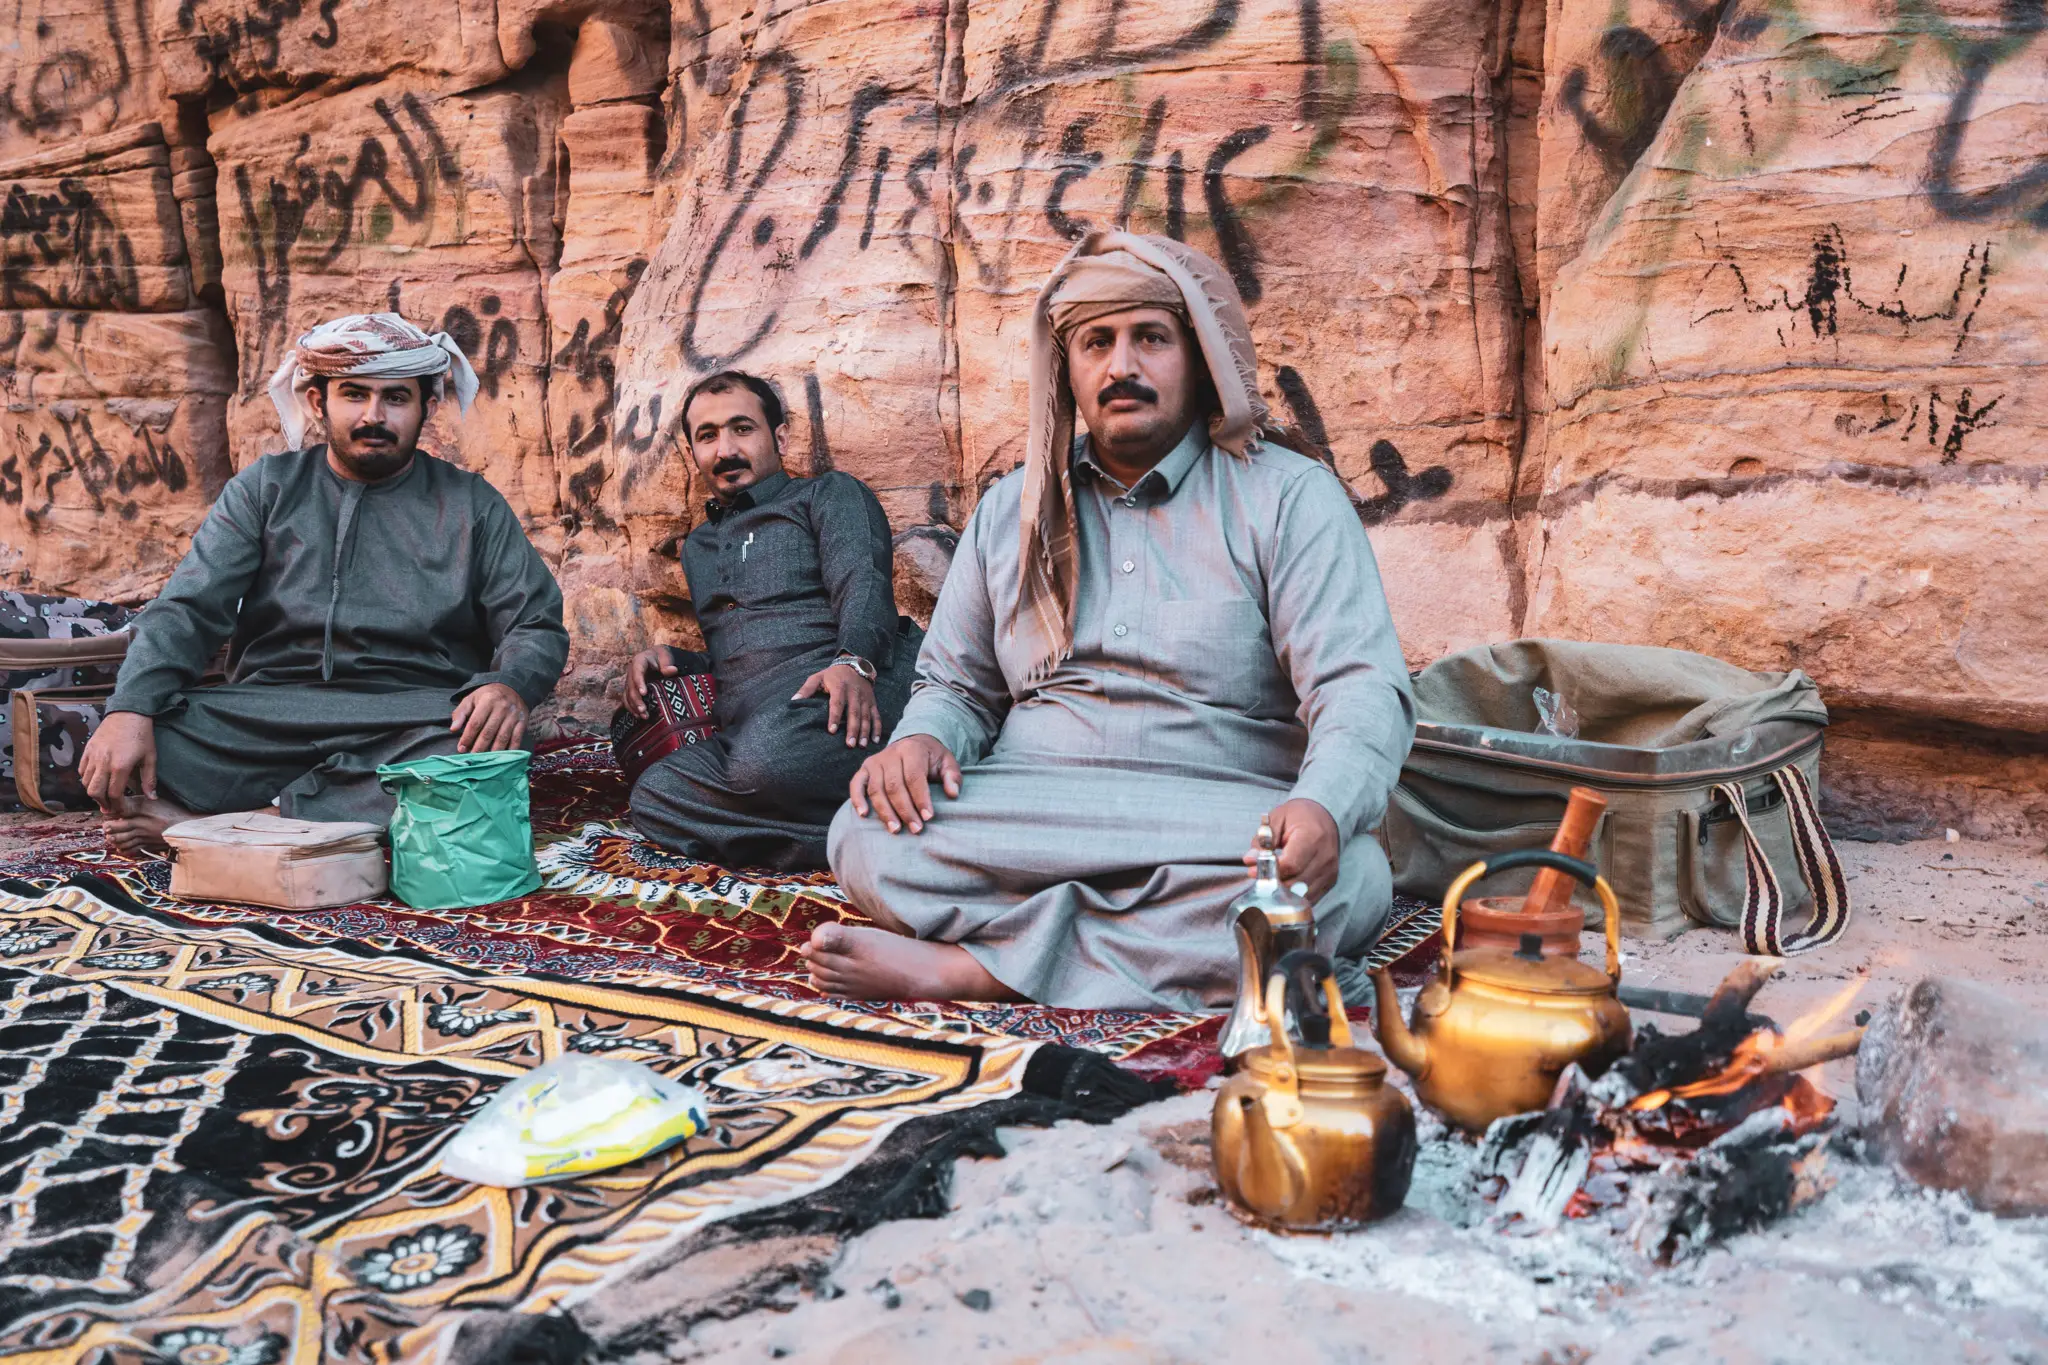 These friendly Saudis invited me to have a cup of chai with them during my visit